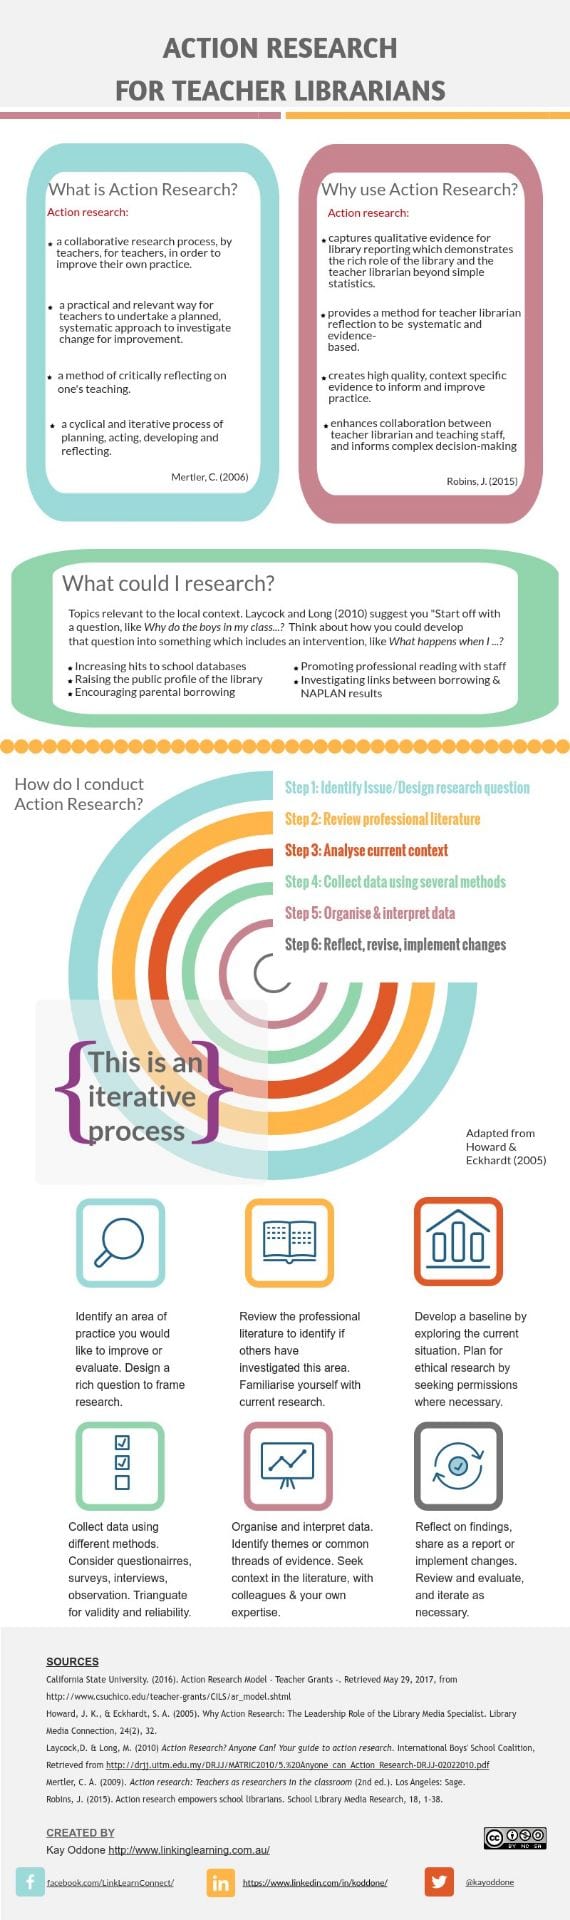 Infographic showing: Action Research for Teacher Librarians: A brief introduction and overview to Action Research as a tool for evidence based practice for teacher librarians. 